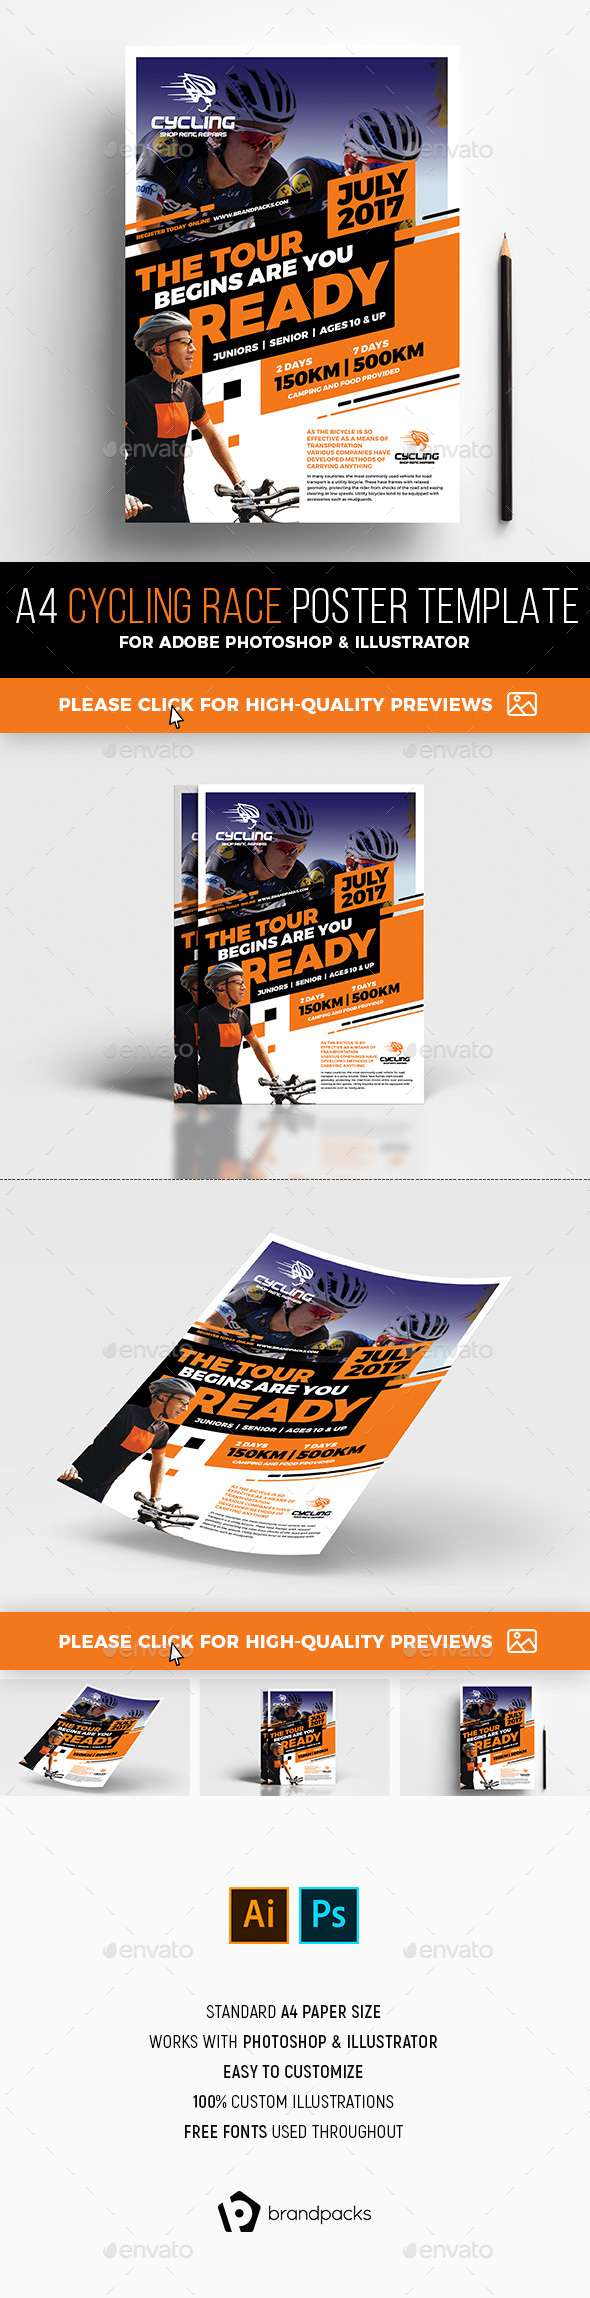 Cycling Race Poster Template